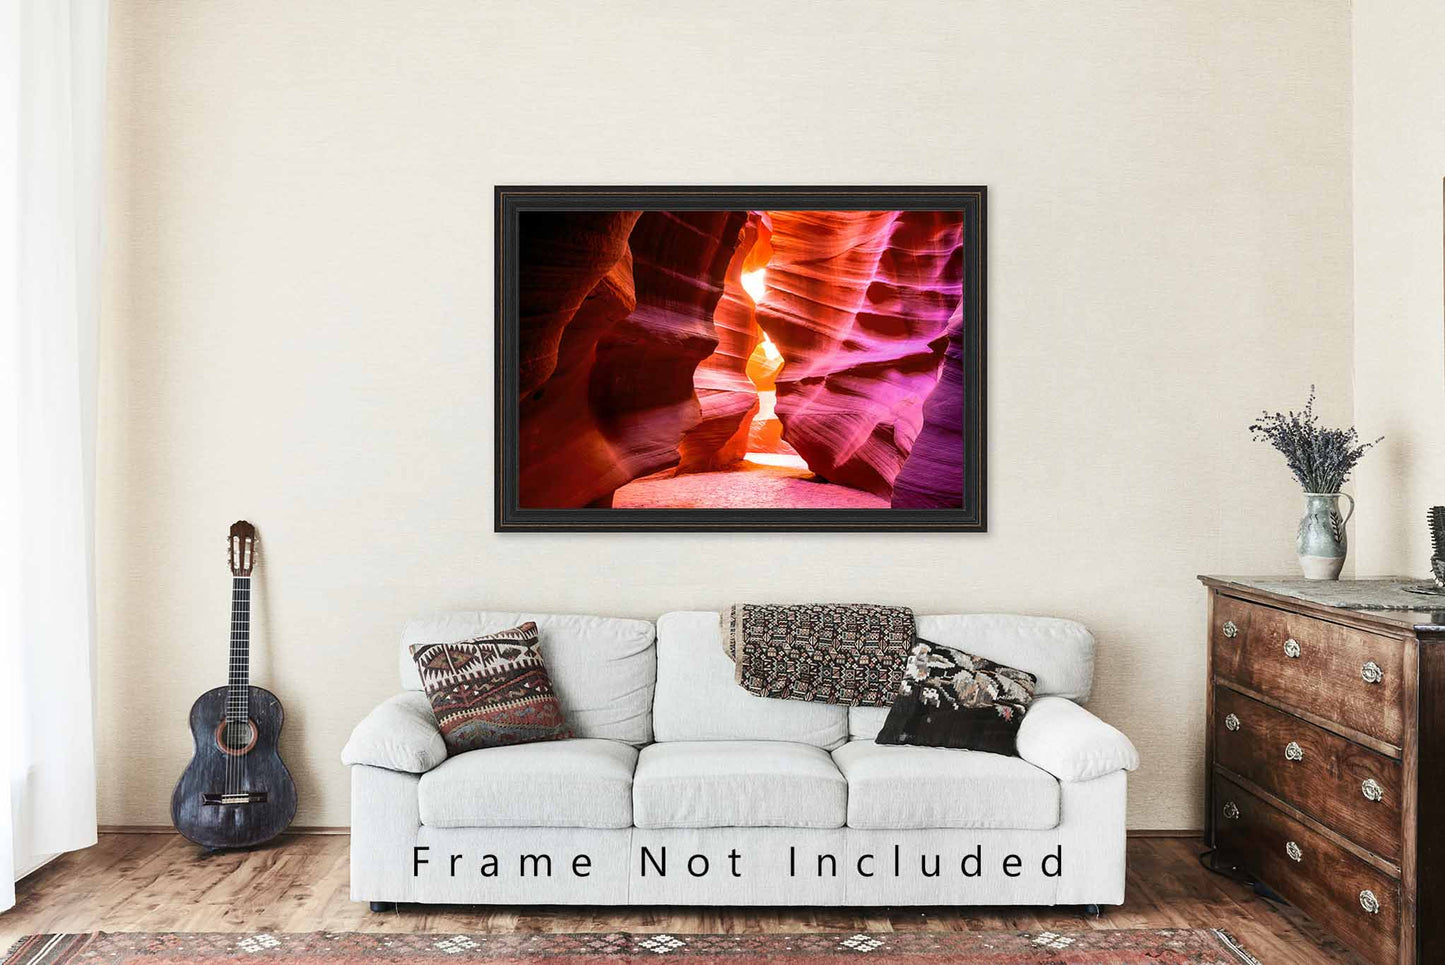 Antelope Canyon Photography Print (Not Framed) Picture of Slot Canyon Walls Shaped as Hourglass in Arizona Desert Wall Art Southwestern Decor